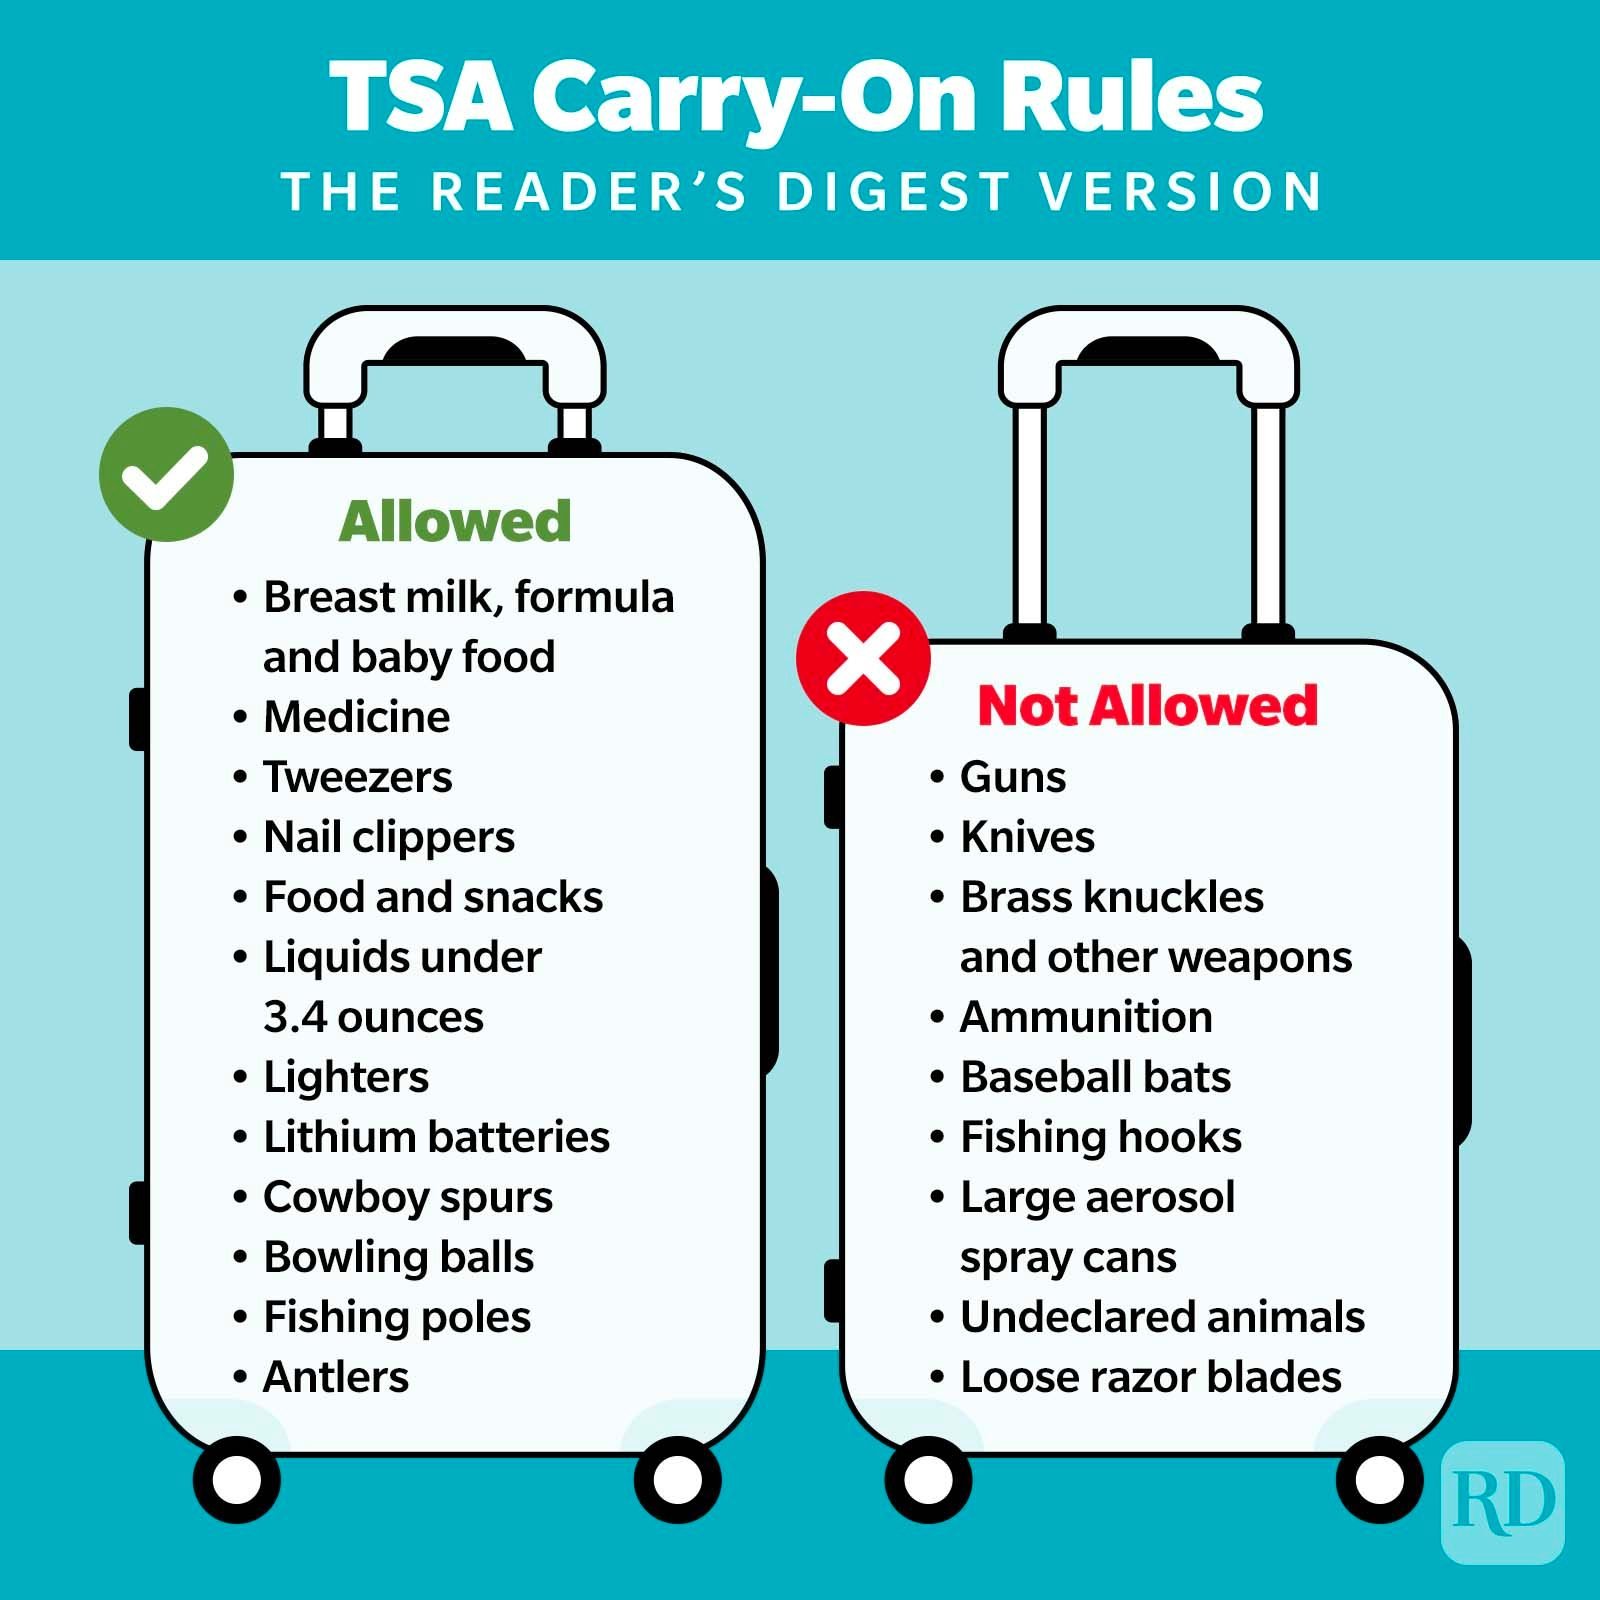  What Are the TSA Carry-On Rules You Need to Follow?